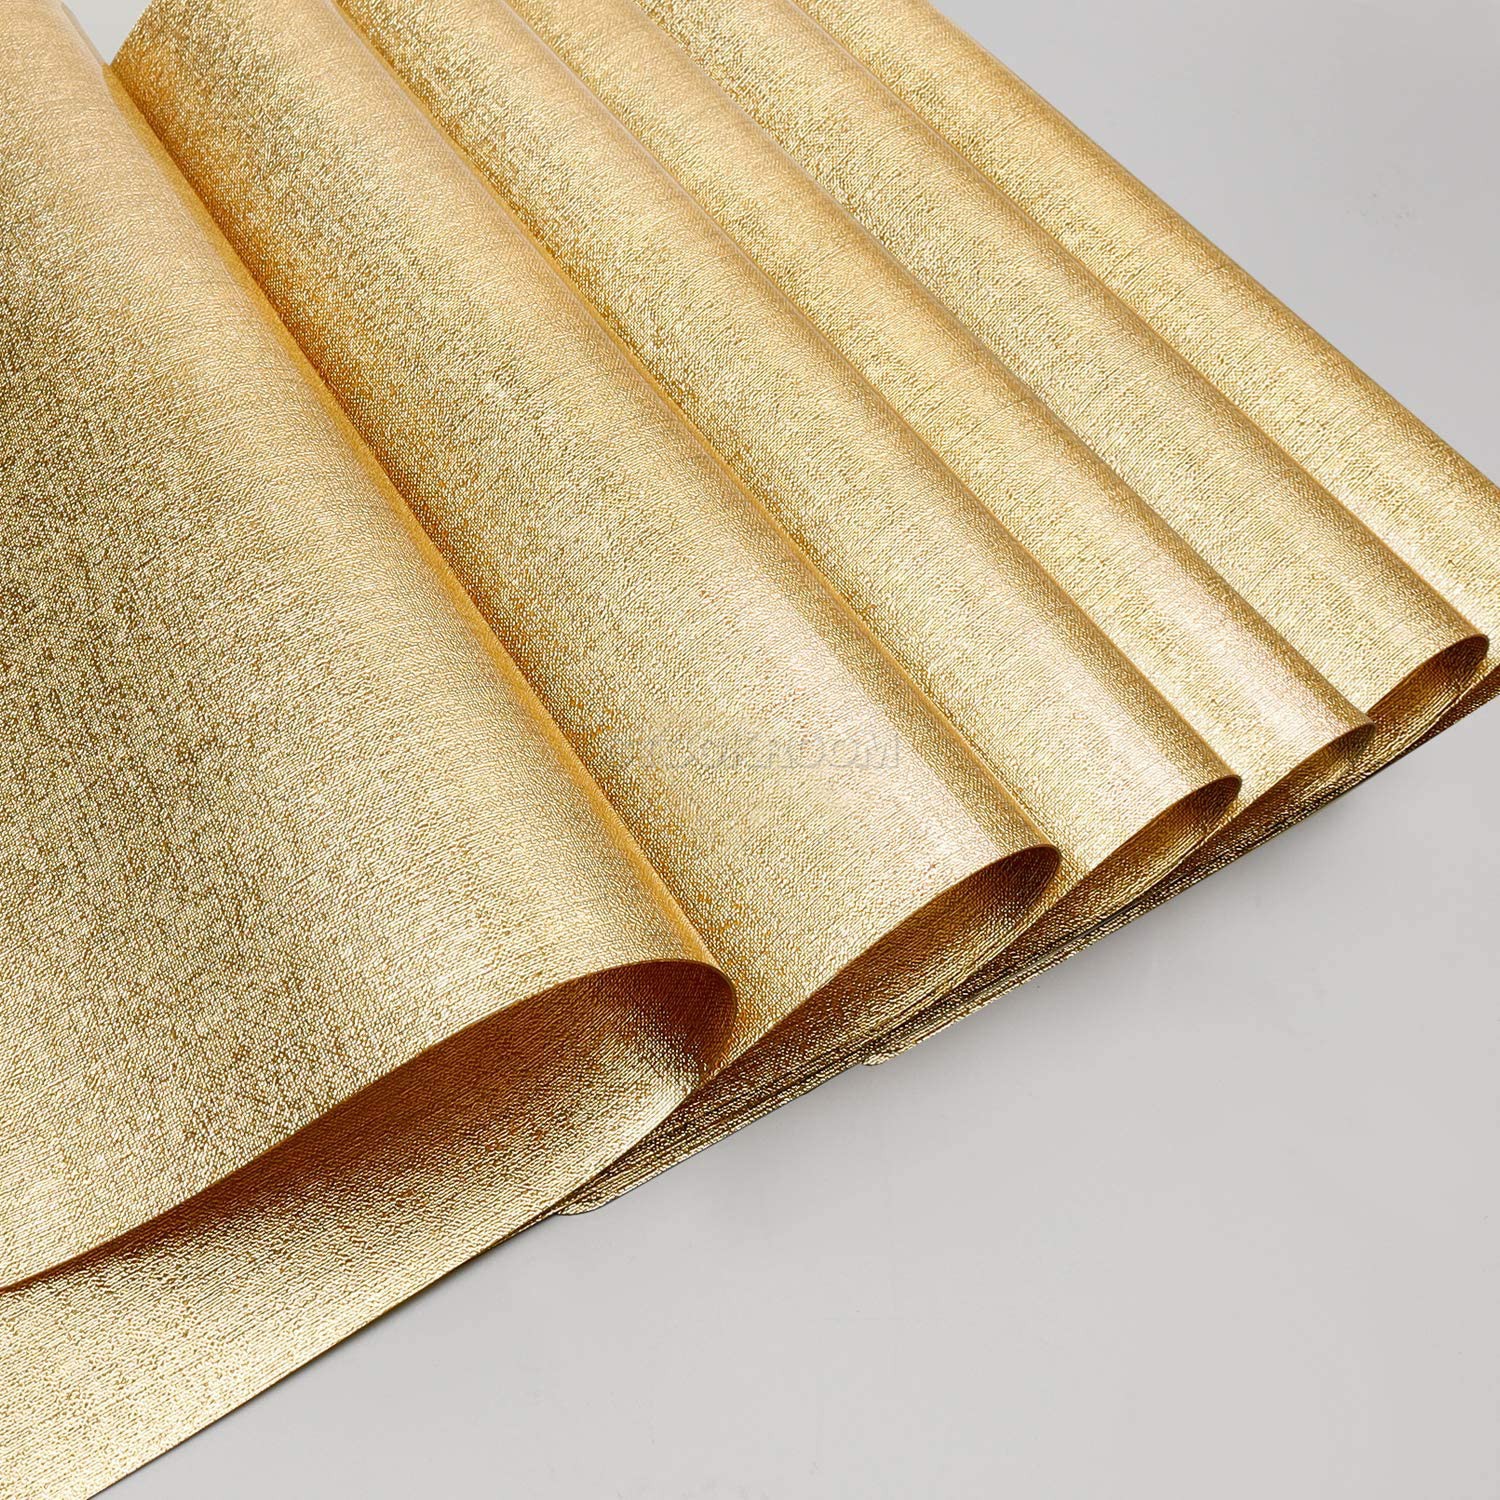 Contemporary Metallic Table Placemat